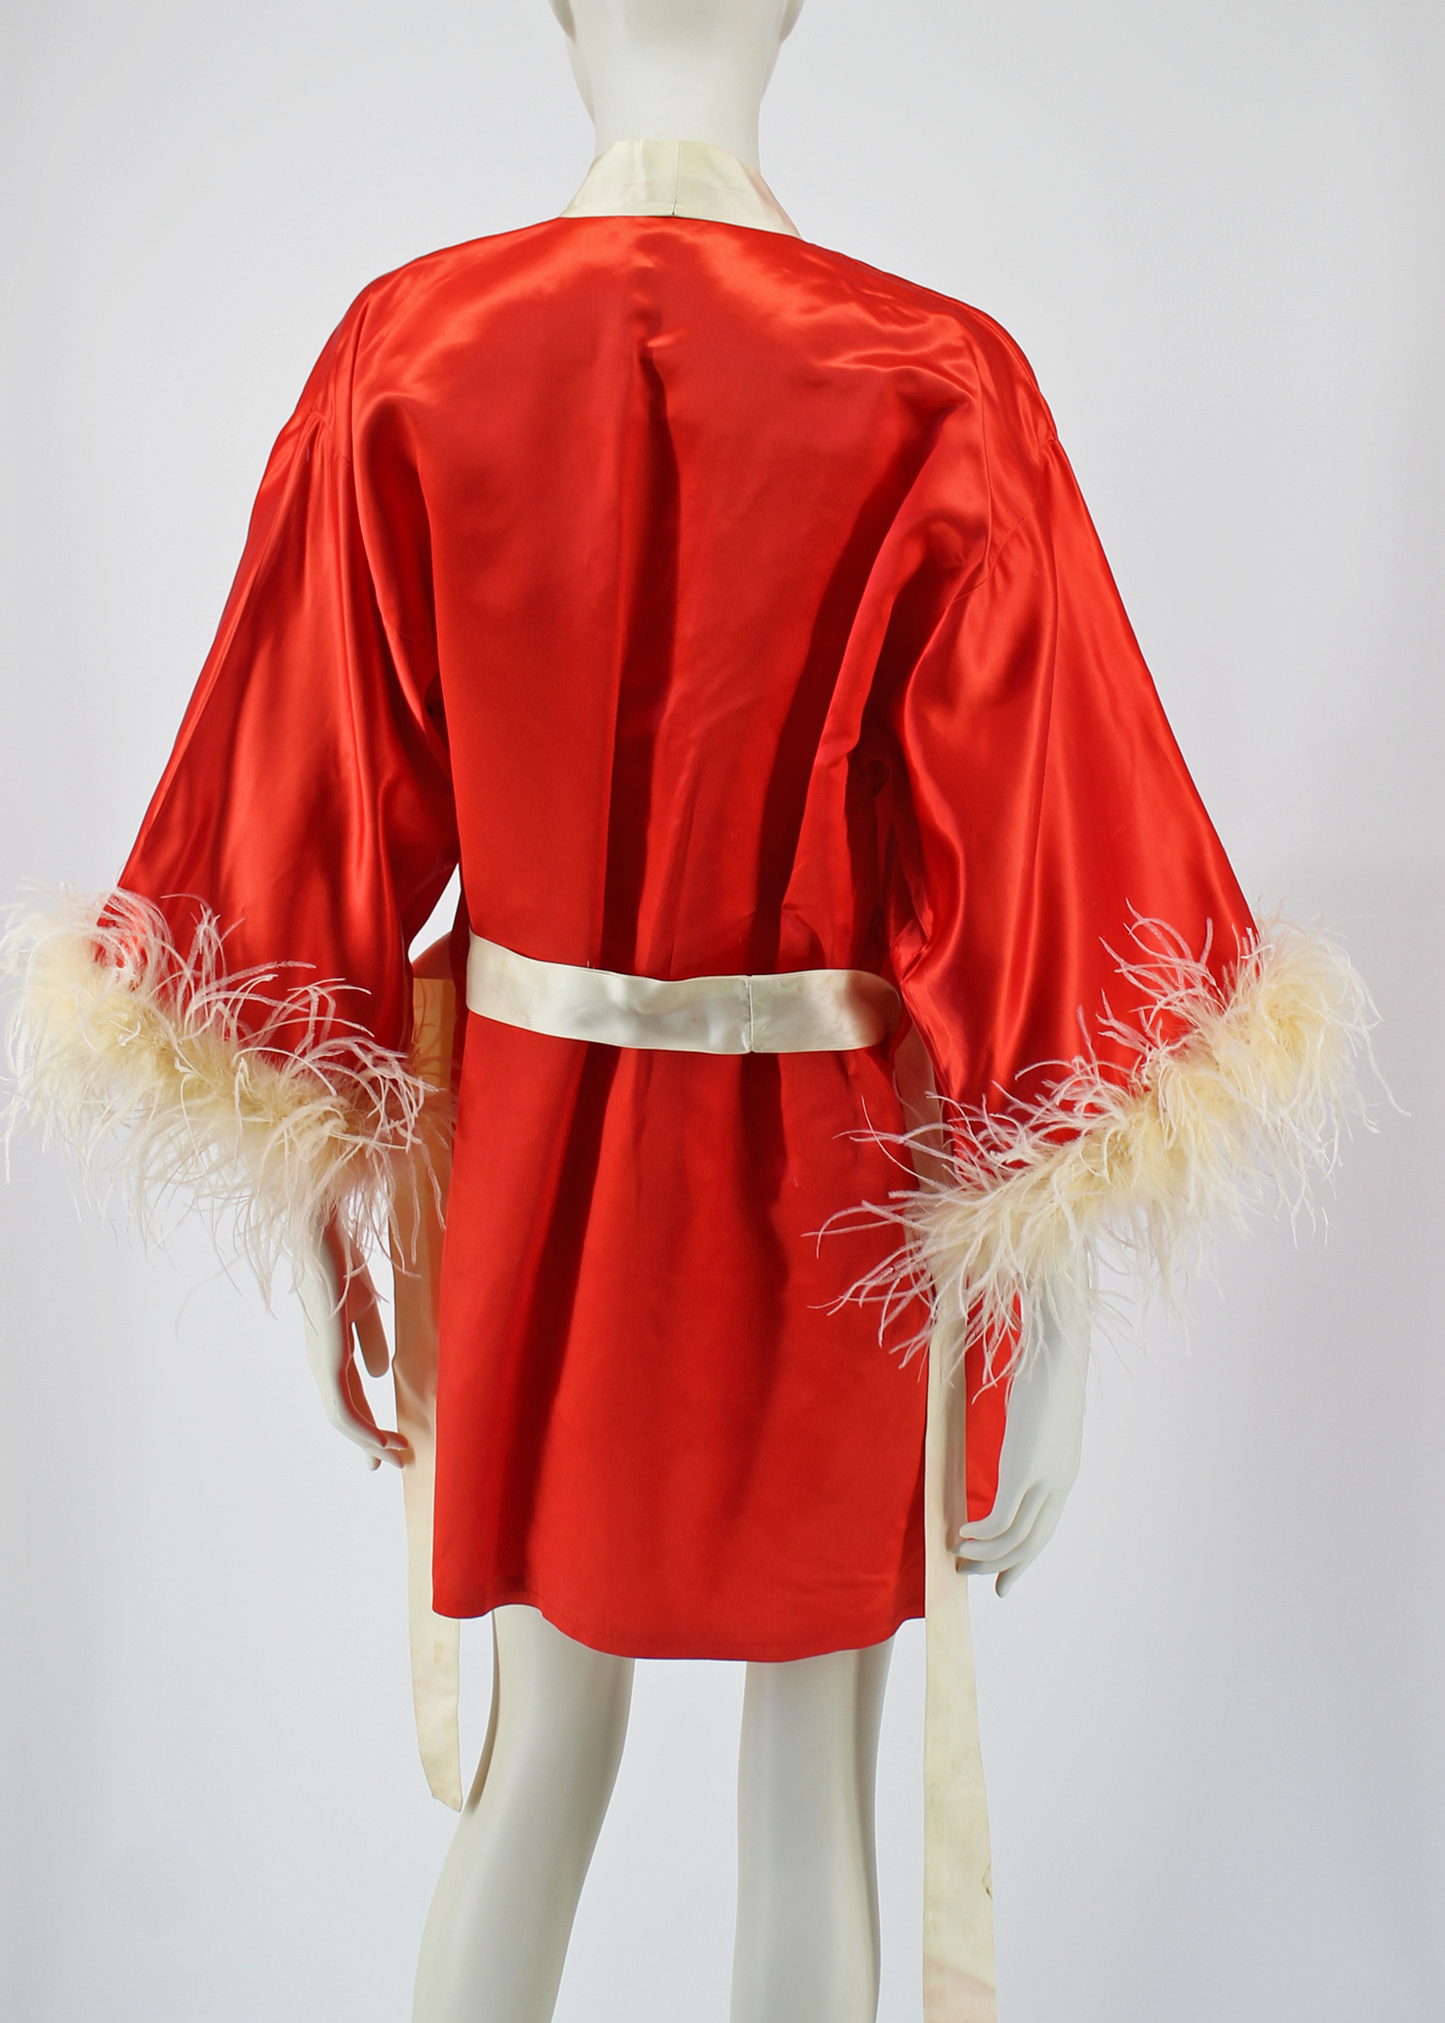 Dauphinette 1940s Red "Hollywood" Hand-Embroidered Robe with Feathers